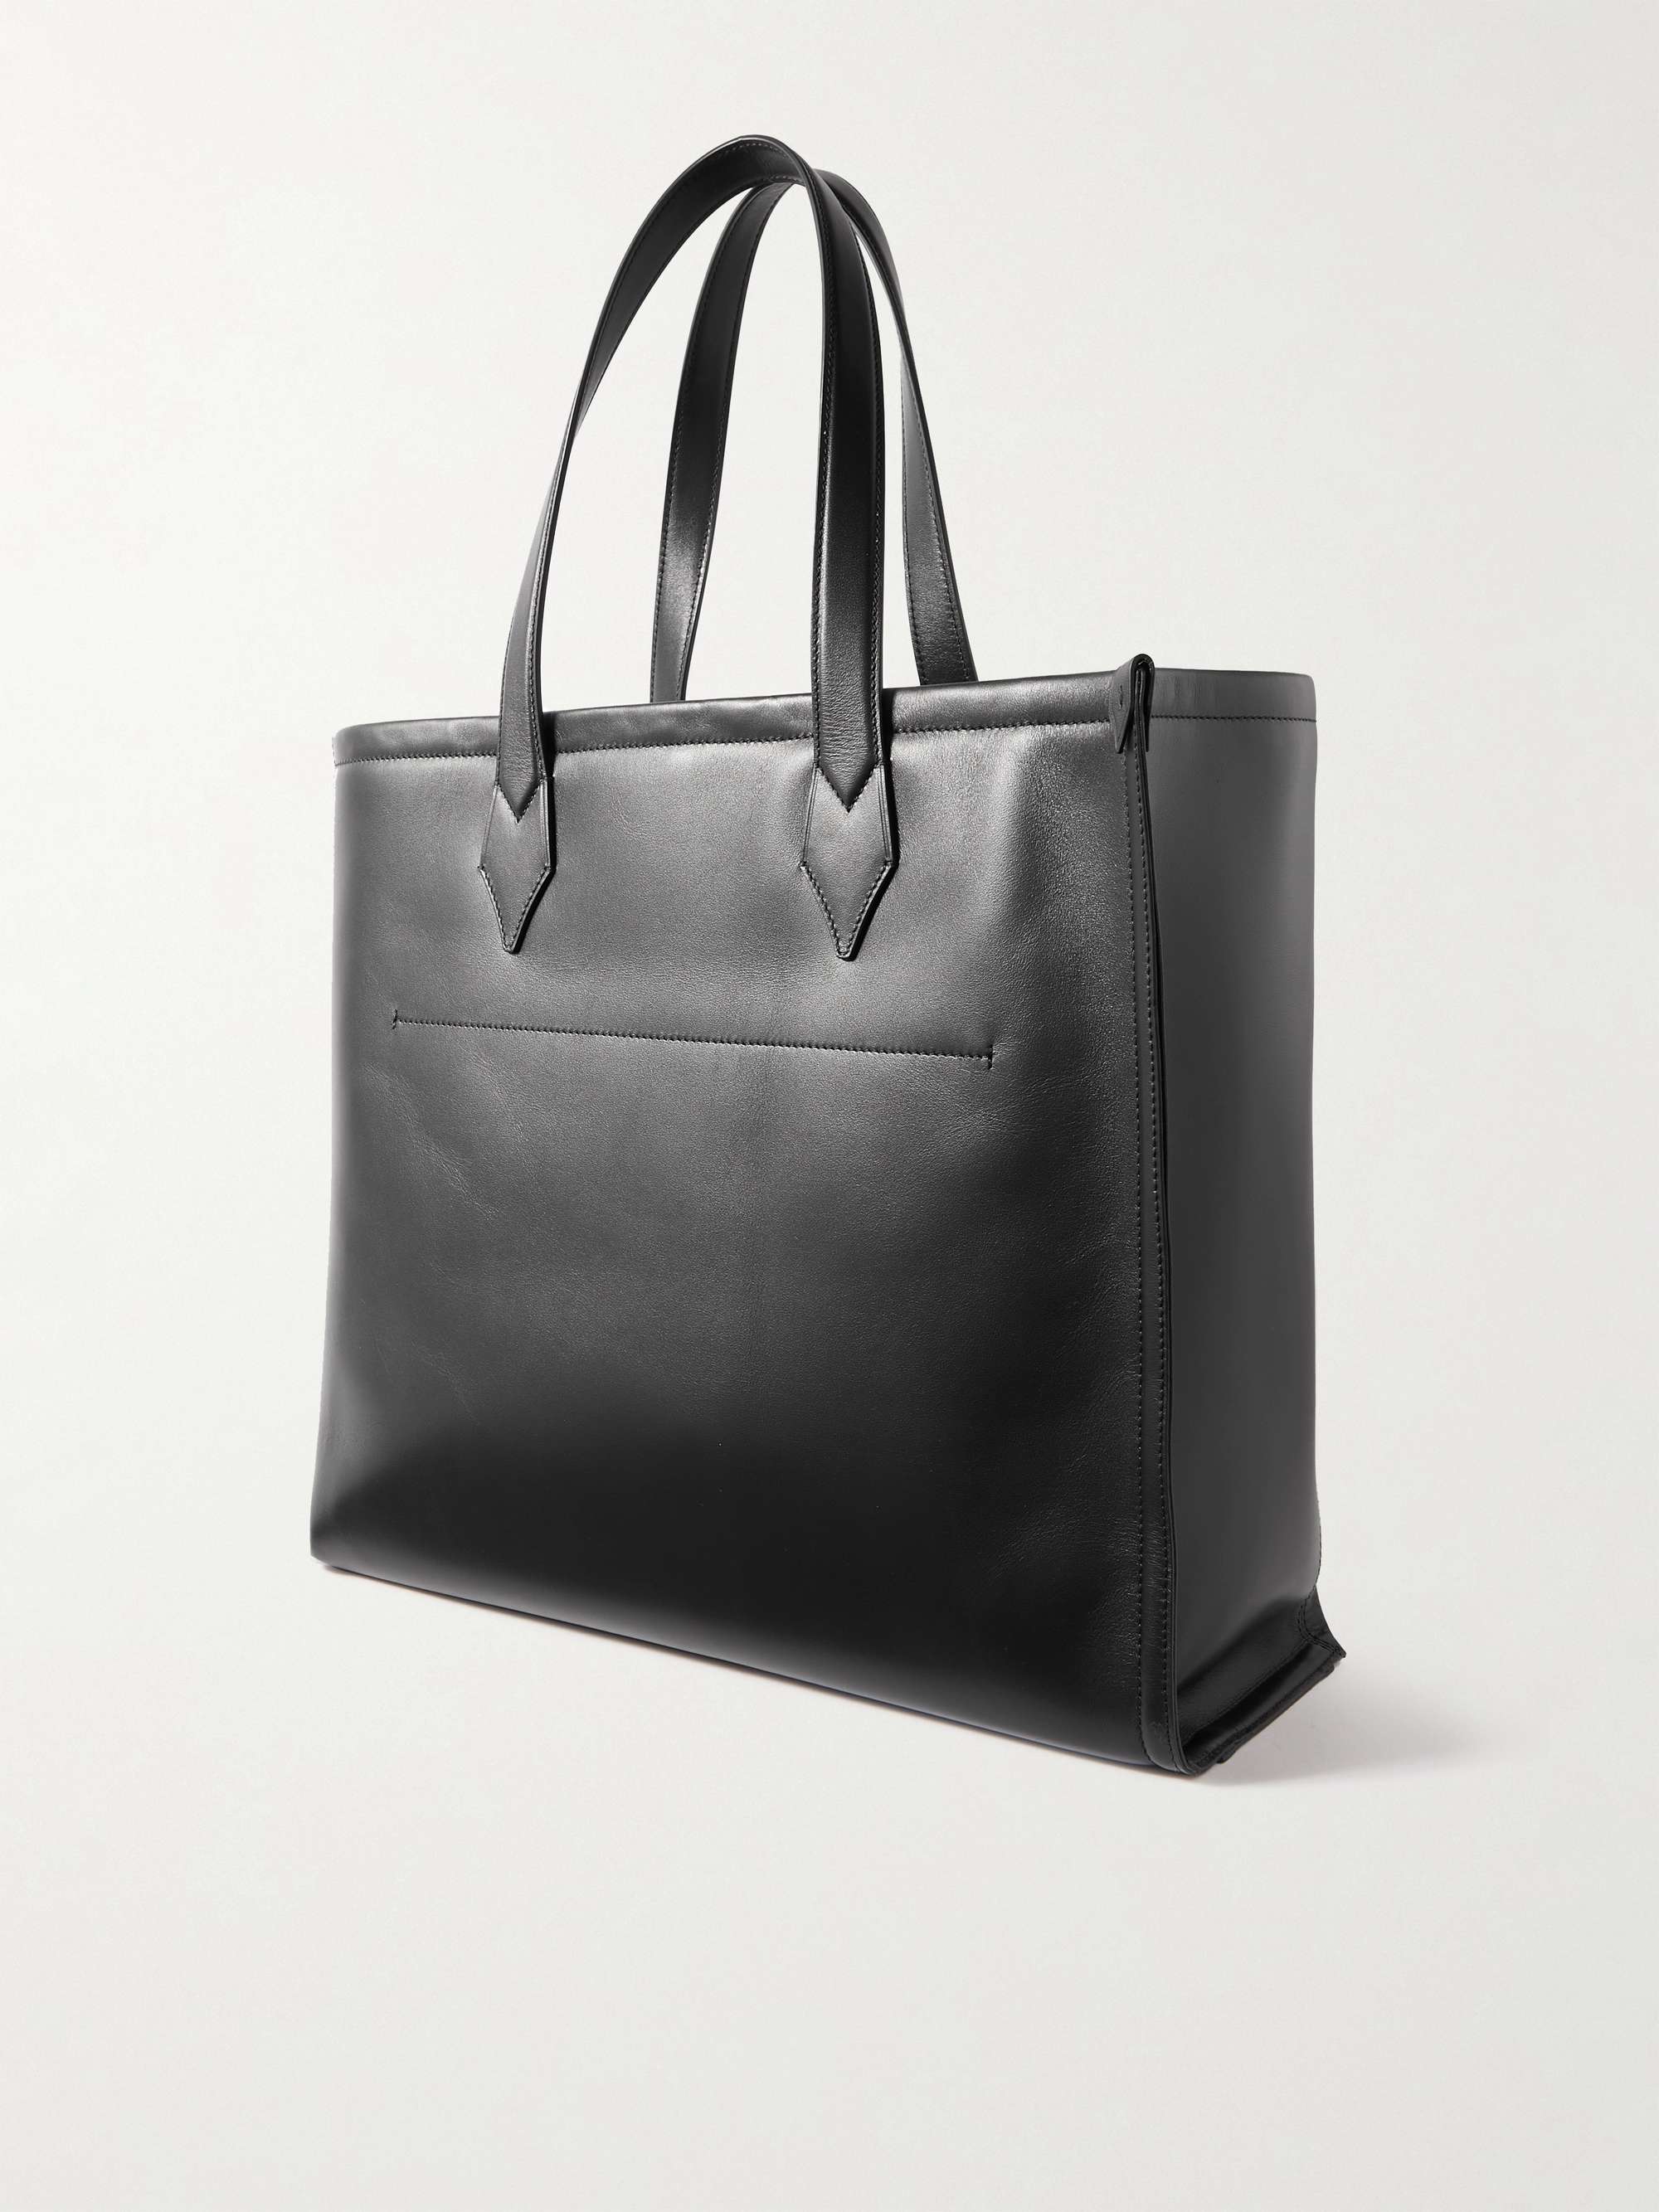 MONTBLANC Meisterstück Selection Leather Tote Bag